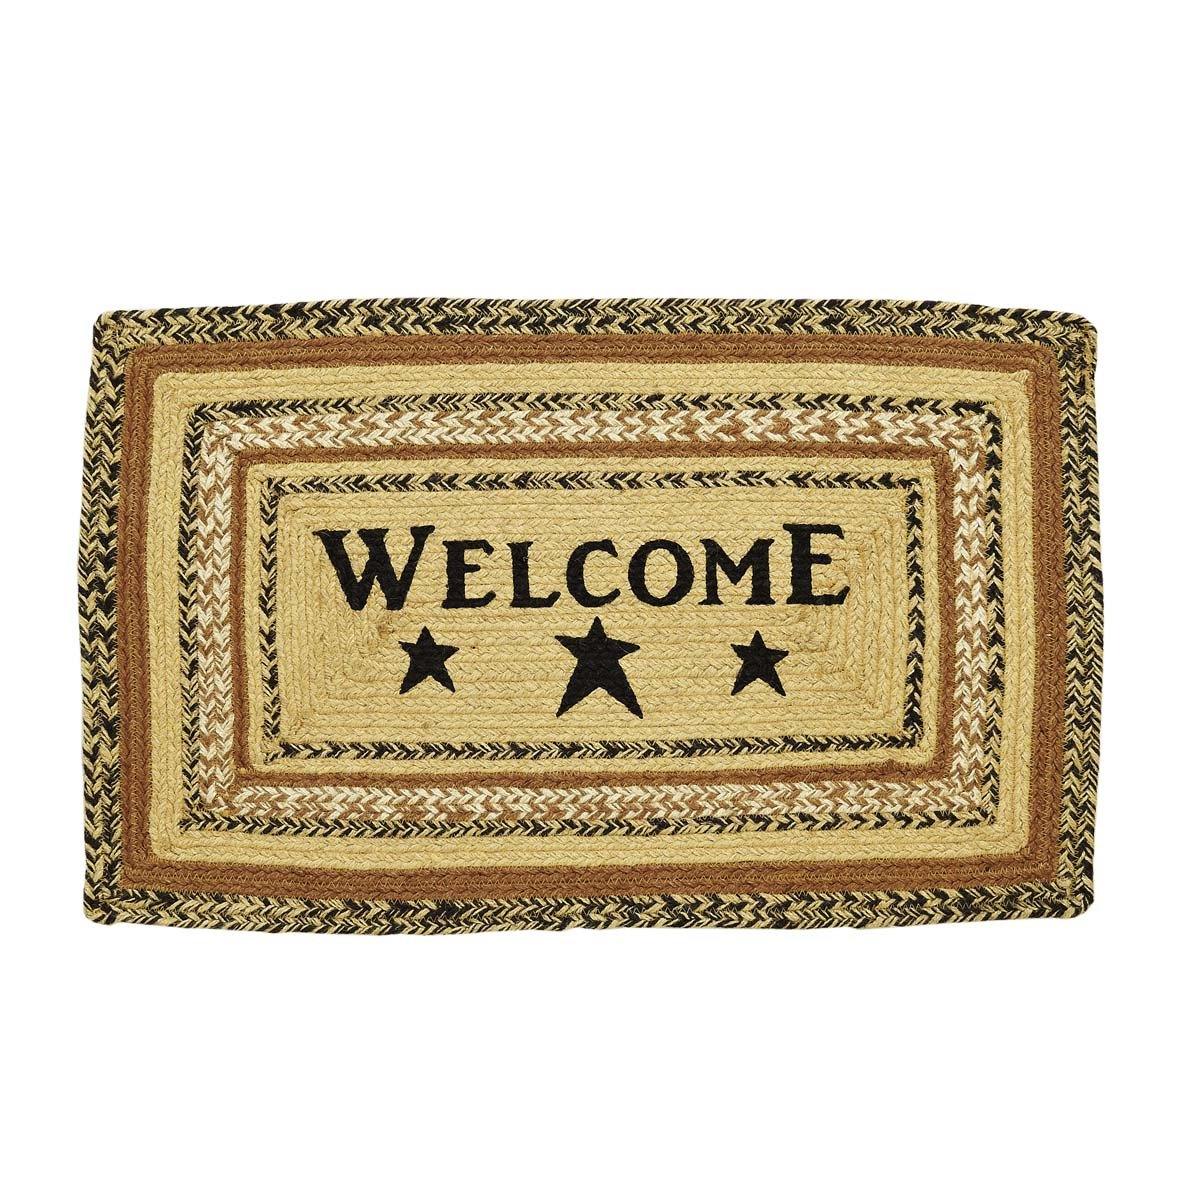 Kettle Grove Jute Braided Rug Rect Stencil Welcome 20"x30" with Rug Pad VHC Brands - The Fox Decor